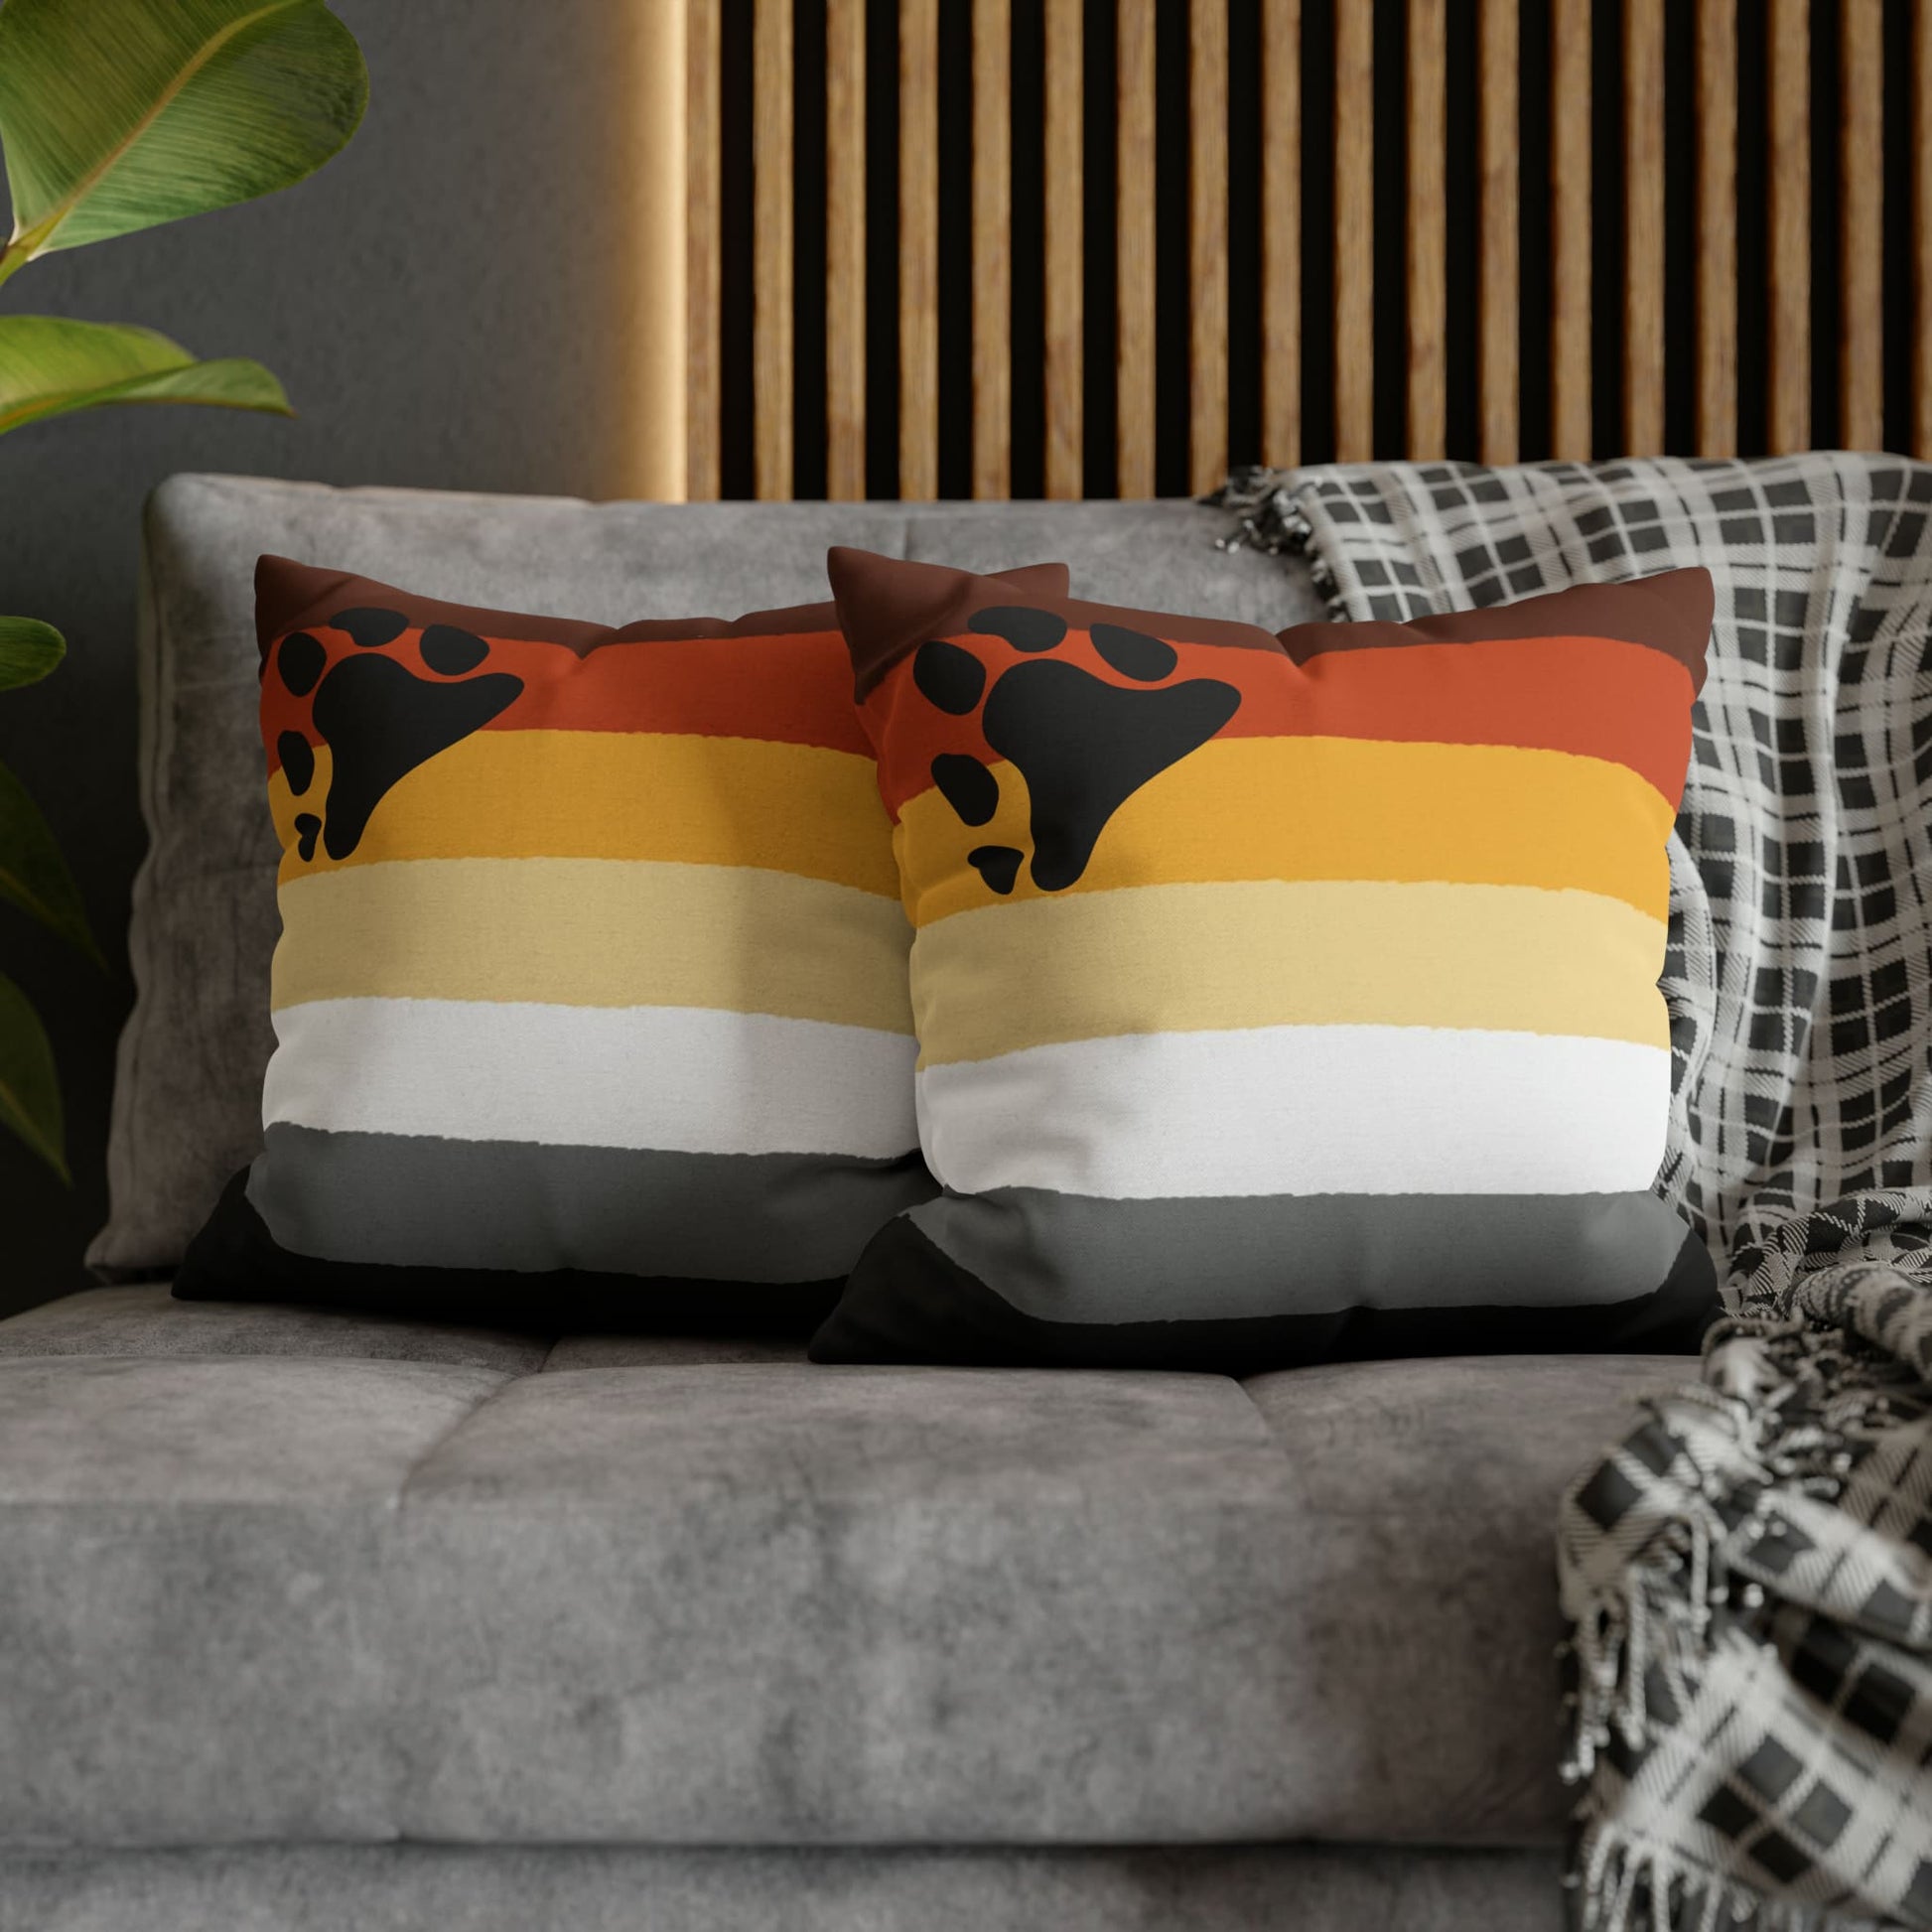 2 bear pride pillows on couch